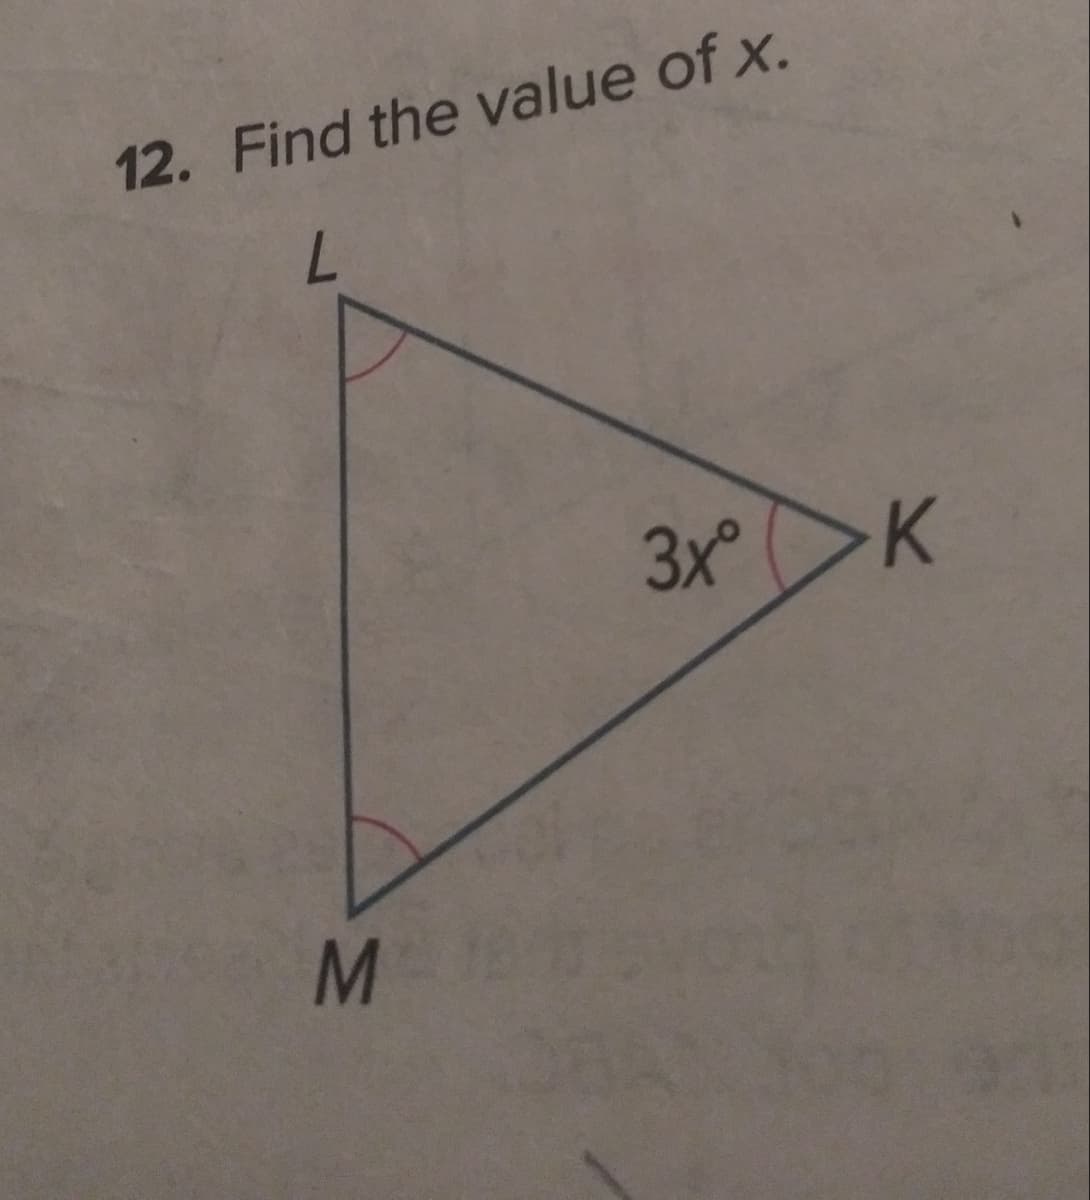 12. Find the value of x.
7.
3x K
MN
